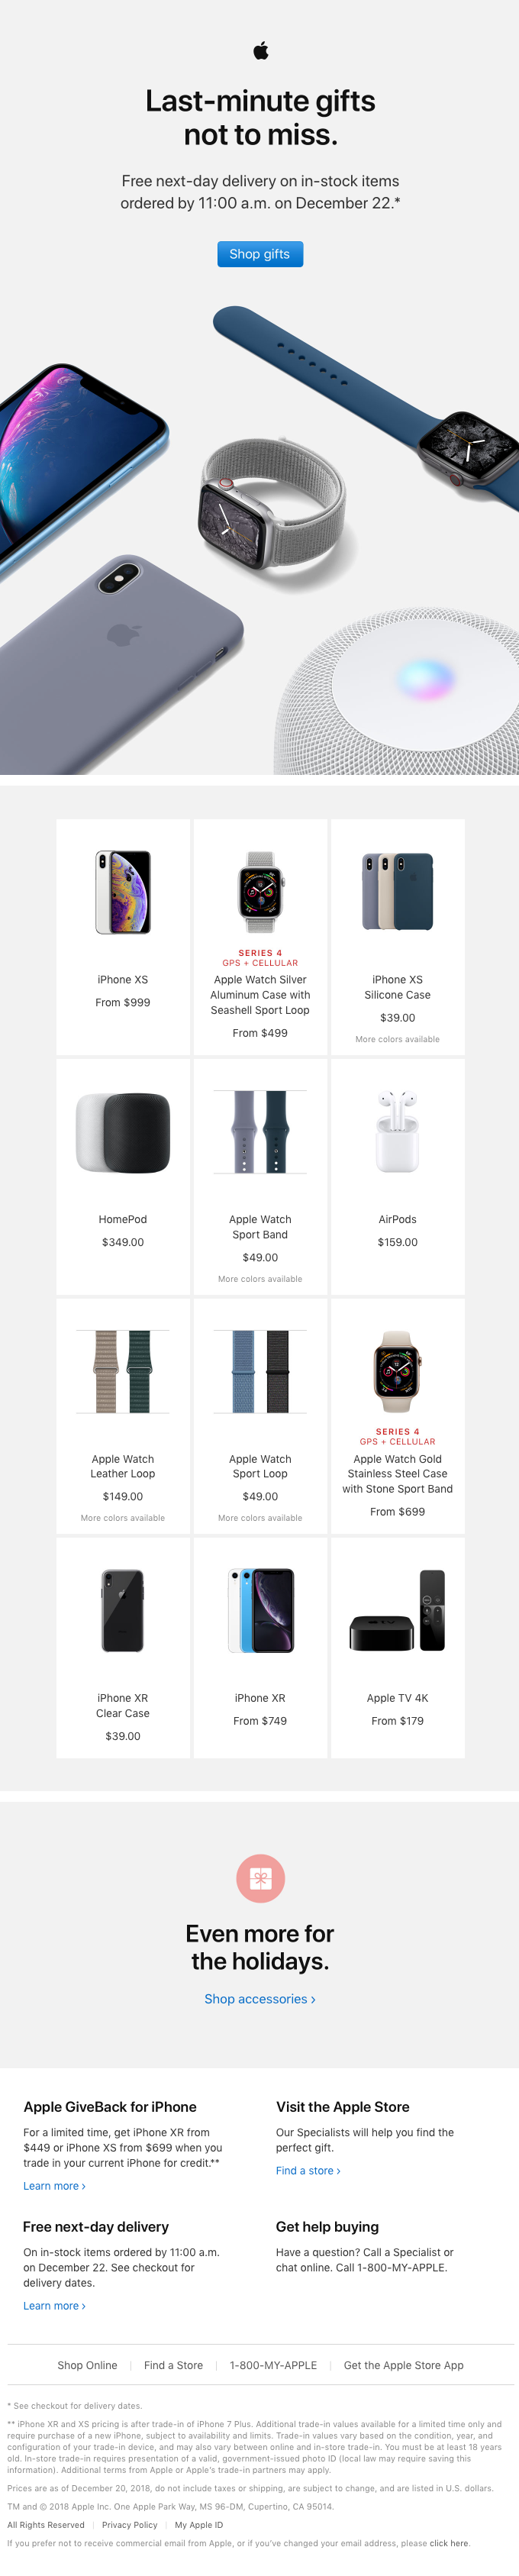 Order last-minute gifts from Apple by December 22.